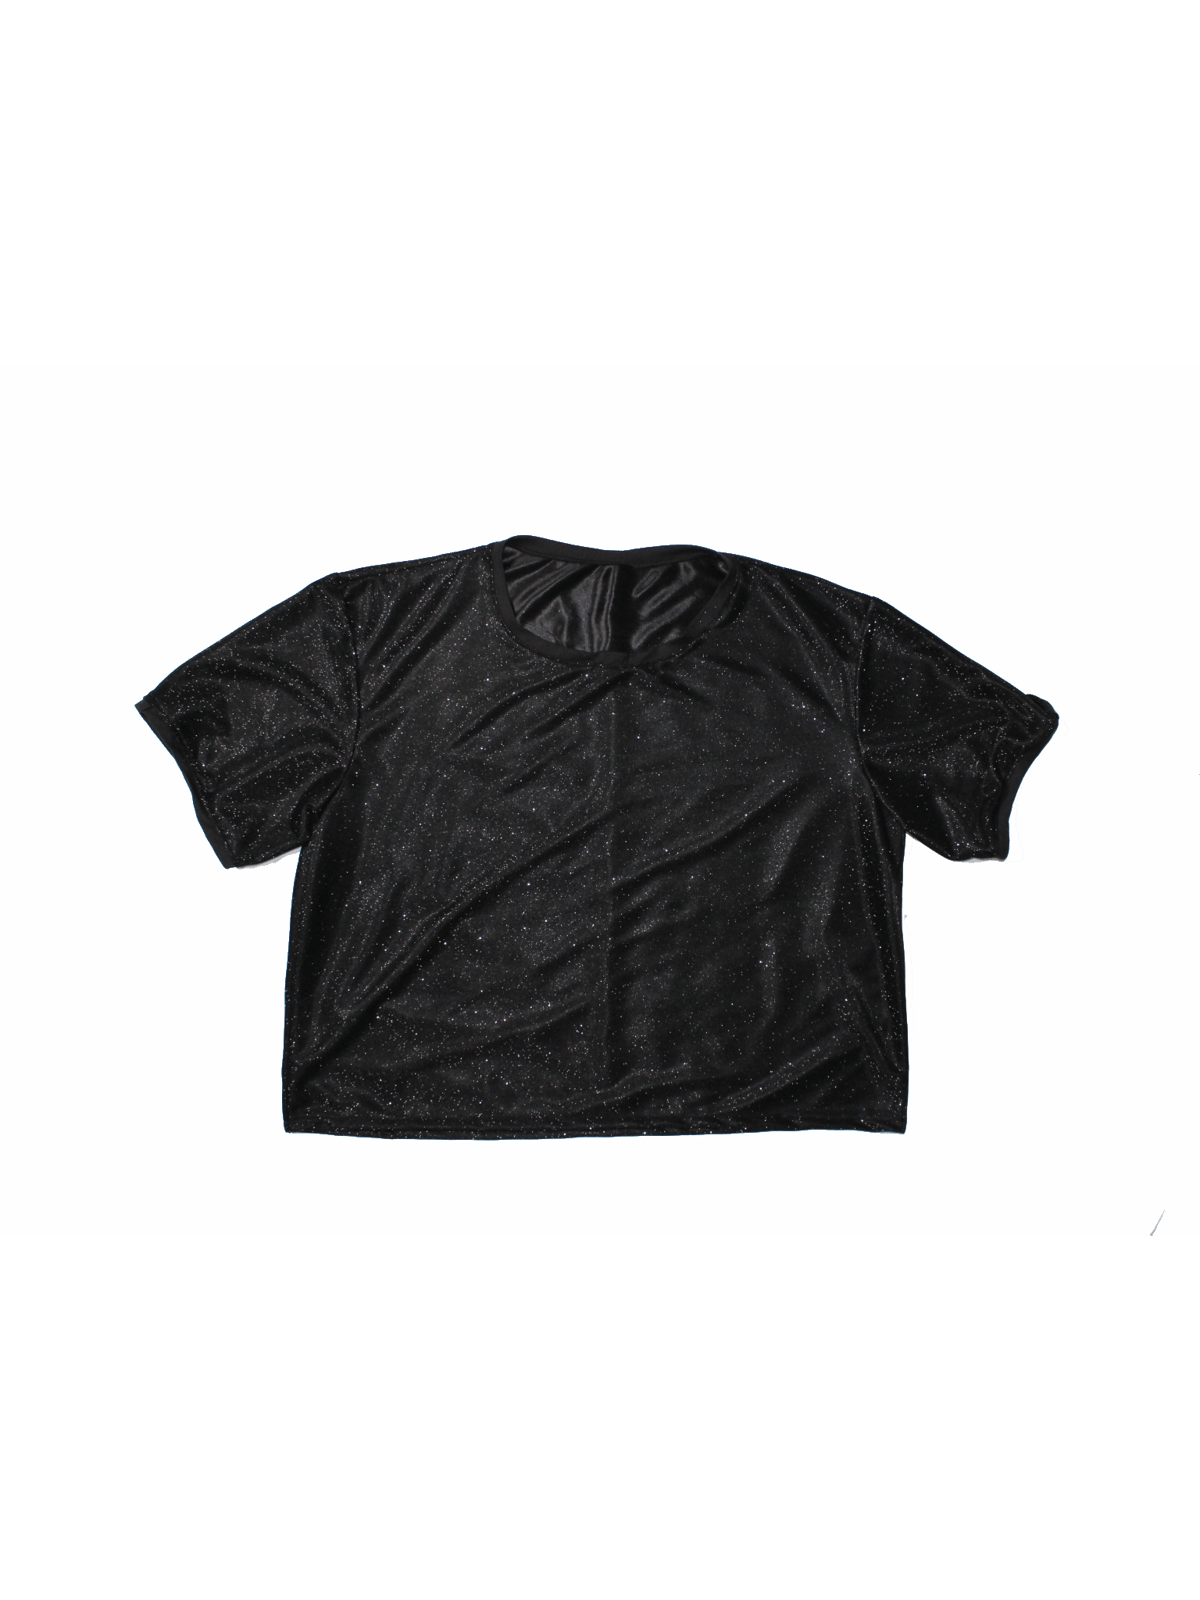 Image of Black glitter shirt (Full length and cropped)